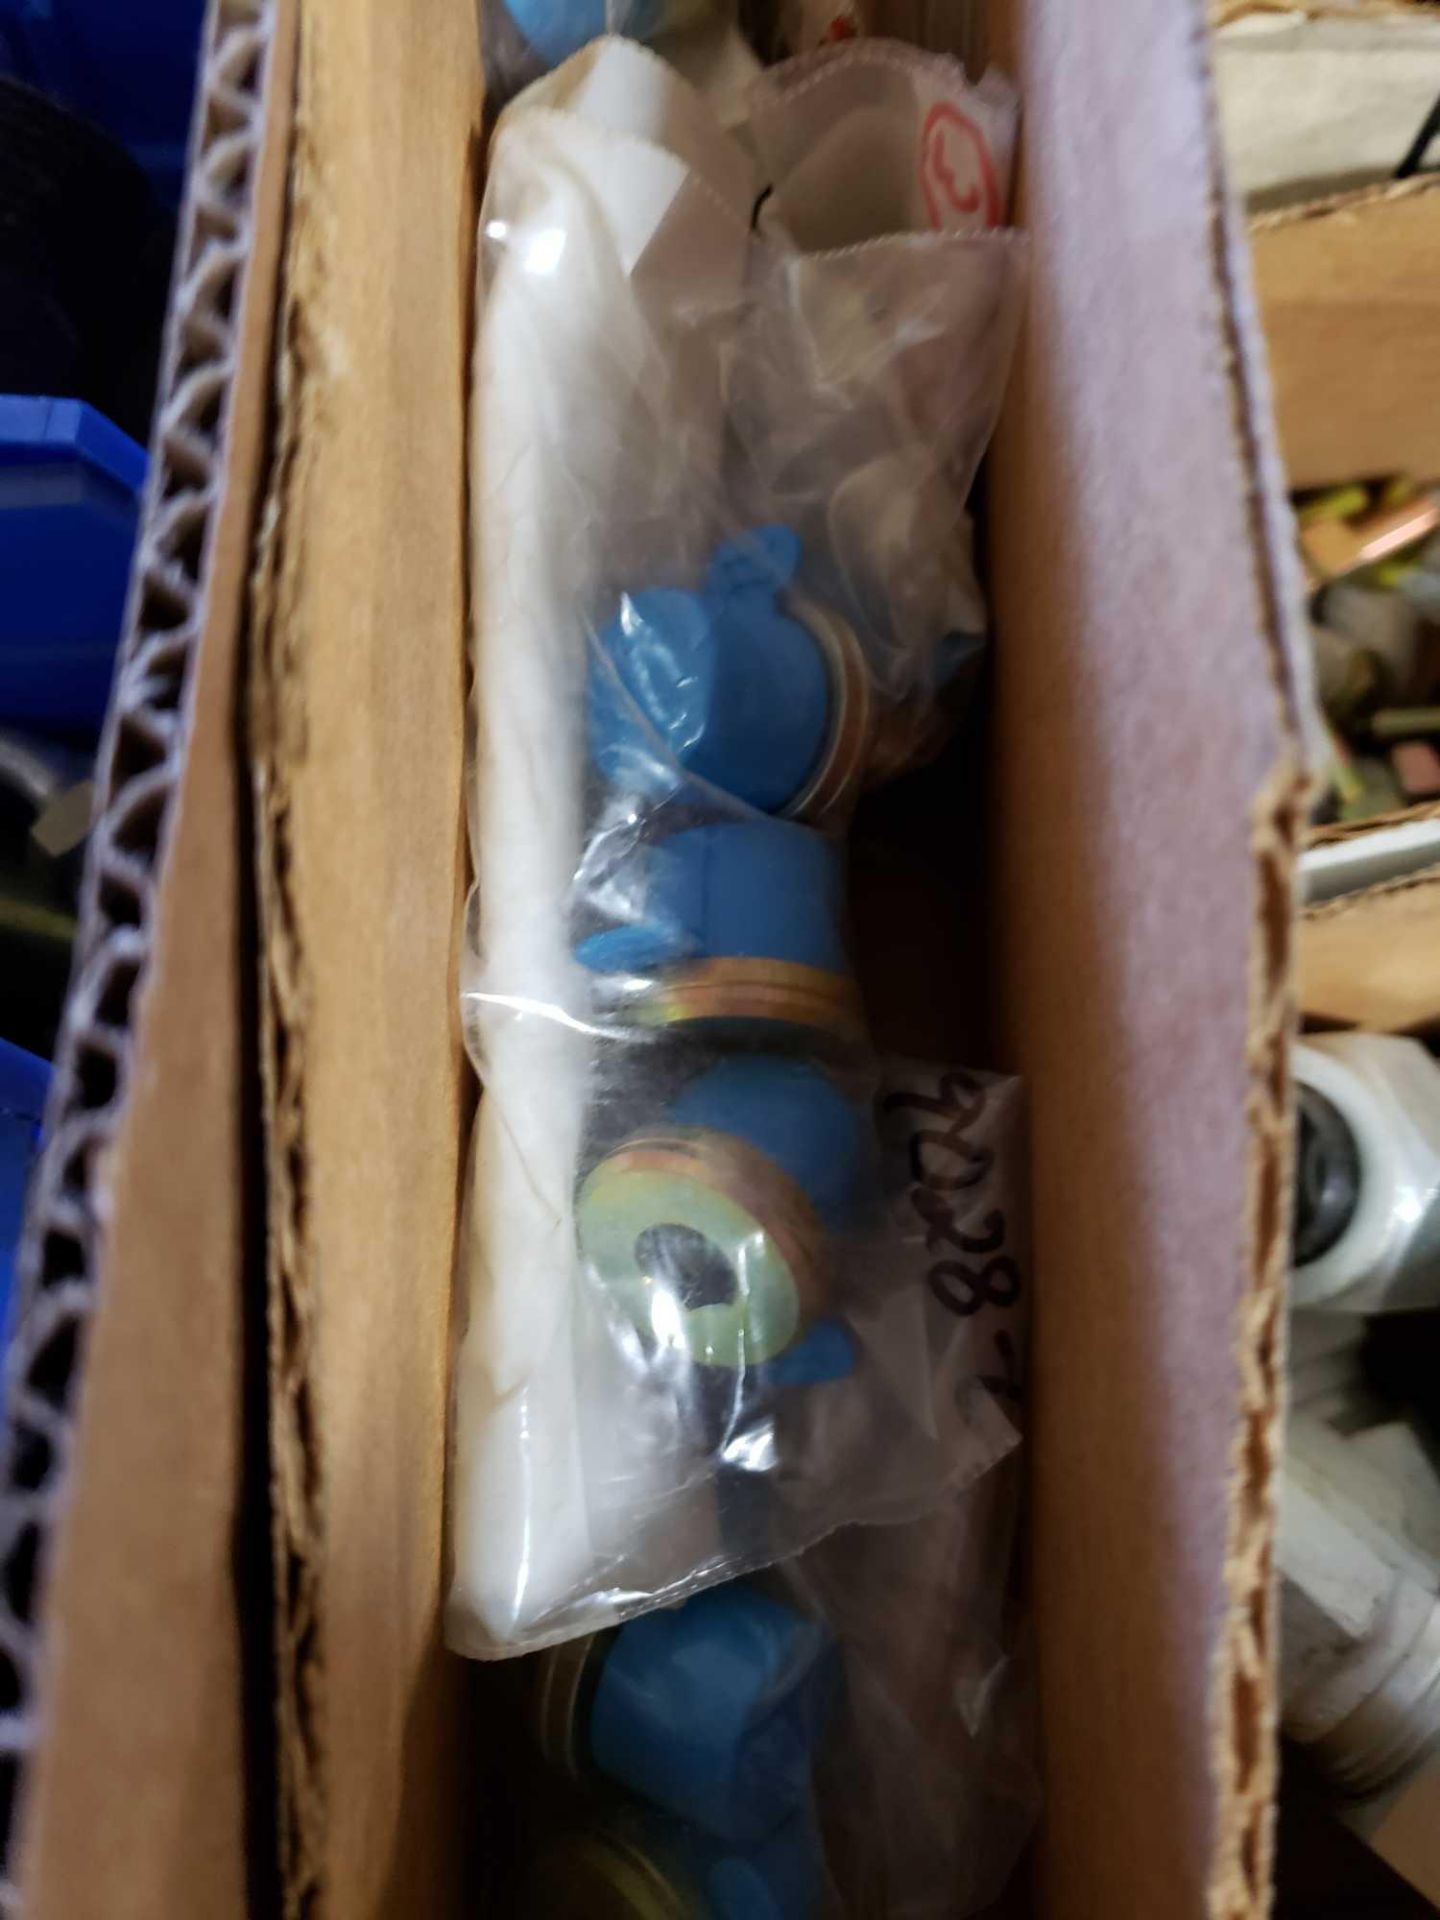 Assorted hydraulic fittings as pictured. New. - Image 4 of 4